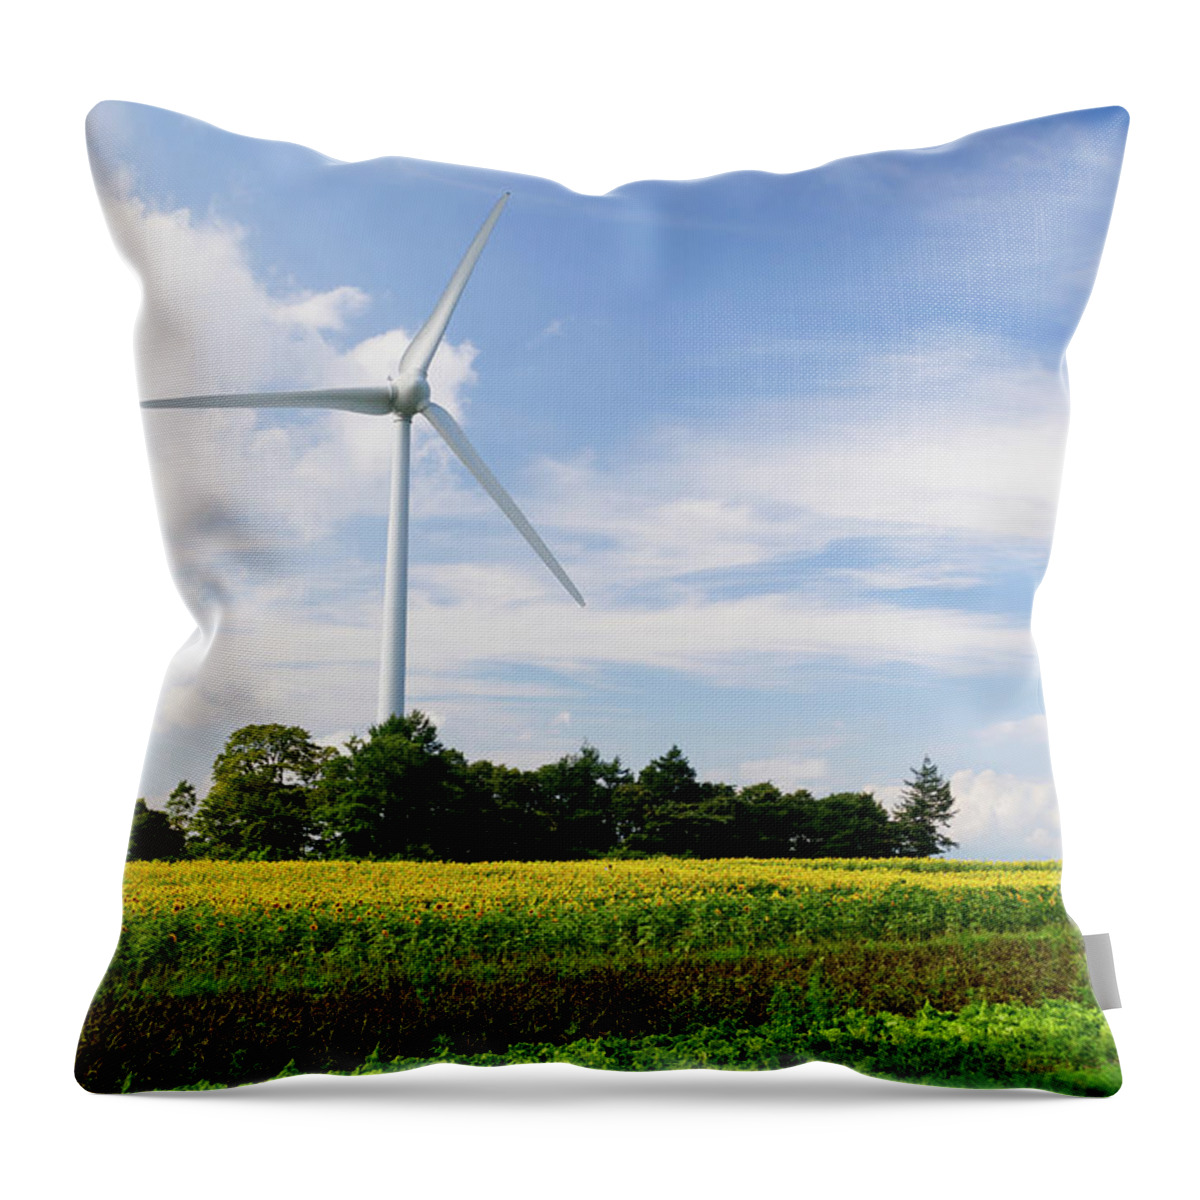 Environmental Conservation Throw Pillow featuring the photograph Sunflower Field With Wind Turbines by Kwphotobox